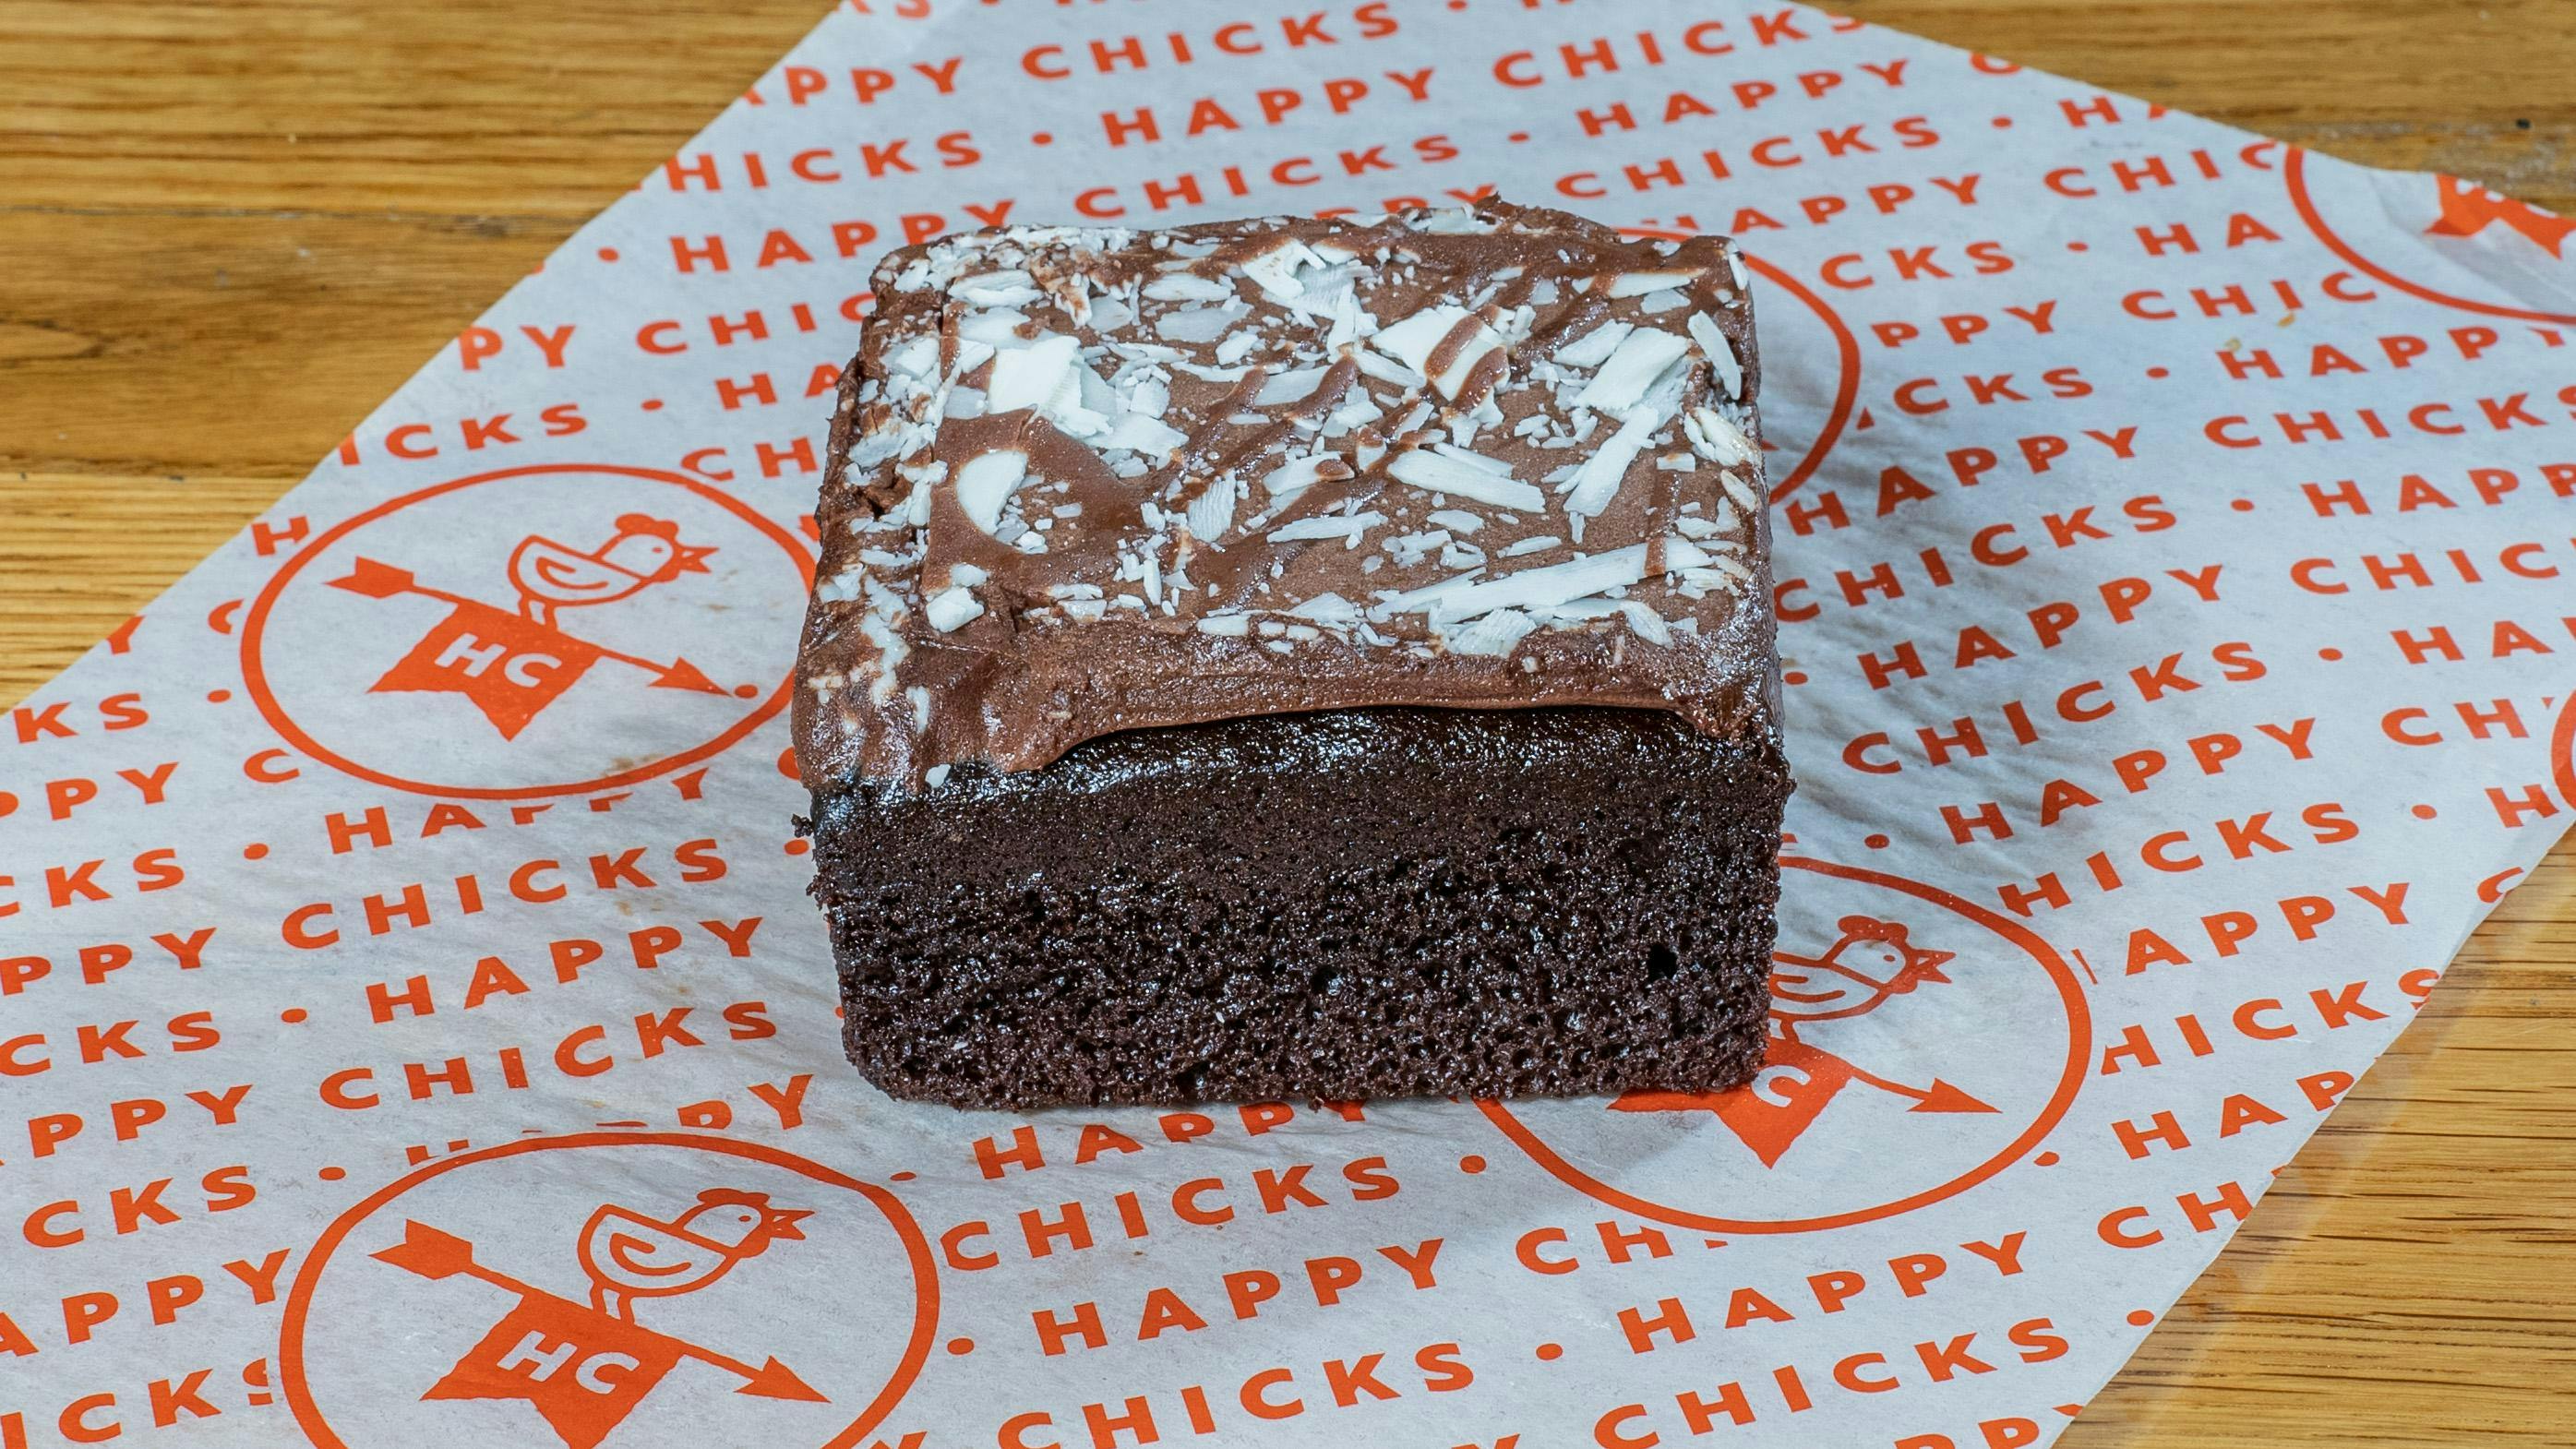 Chocolate Cake from Happy Chicks - East 6th St in Austin, TX